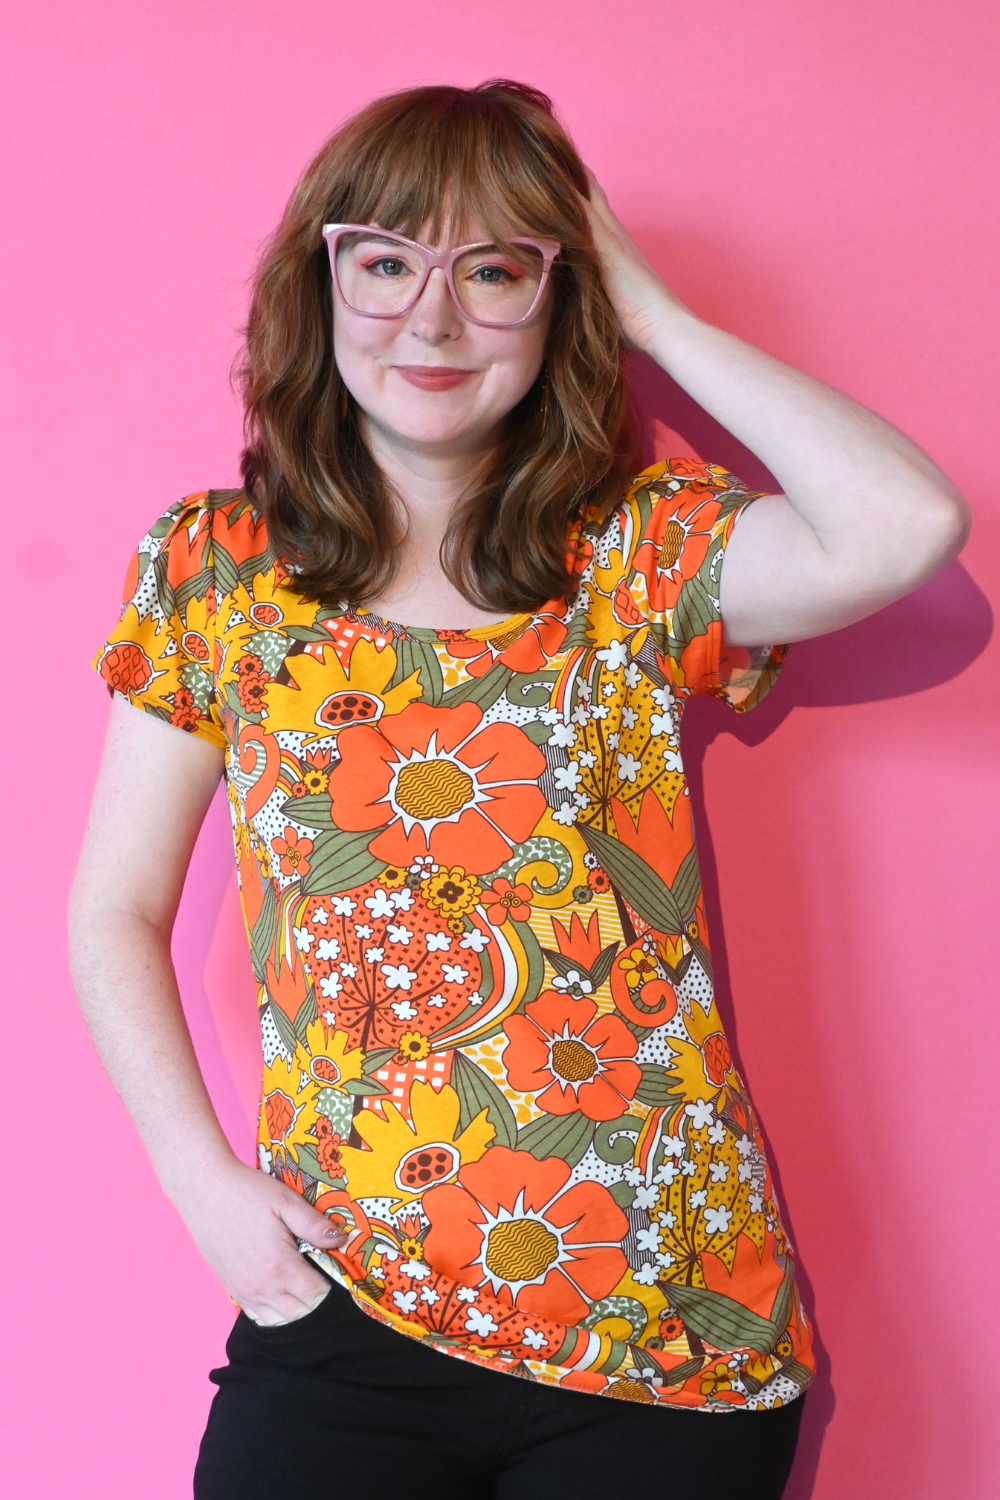 Girl in glasses wearing bright colored tee with large floral print